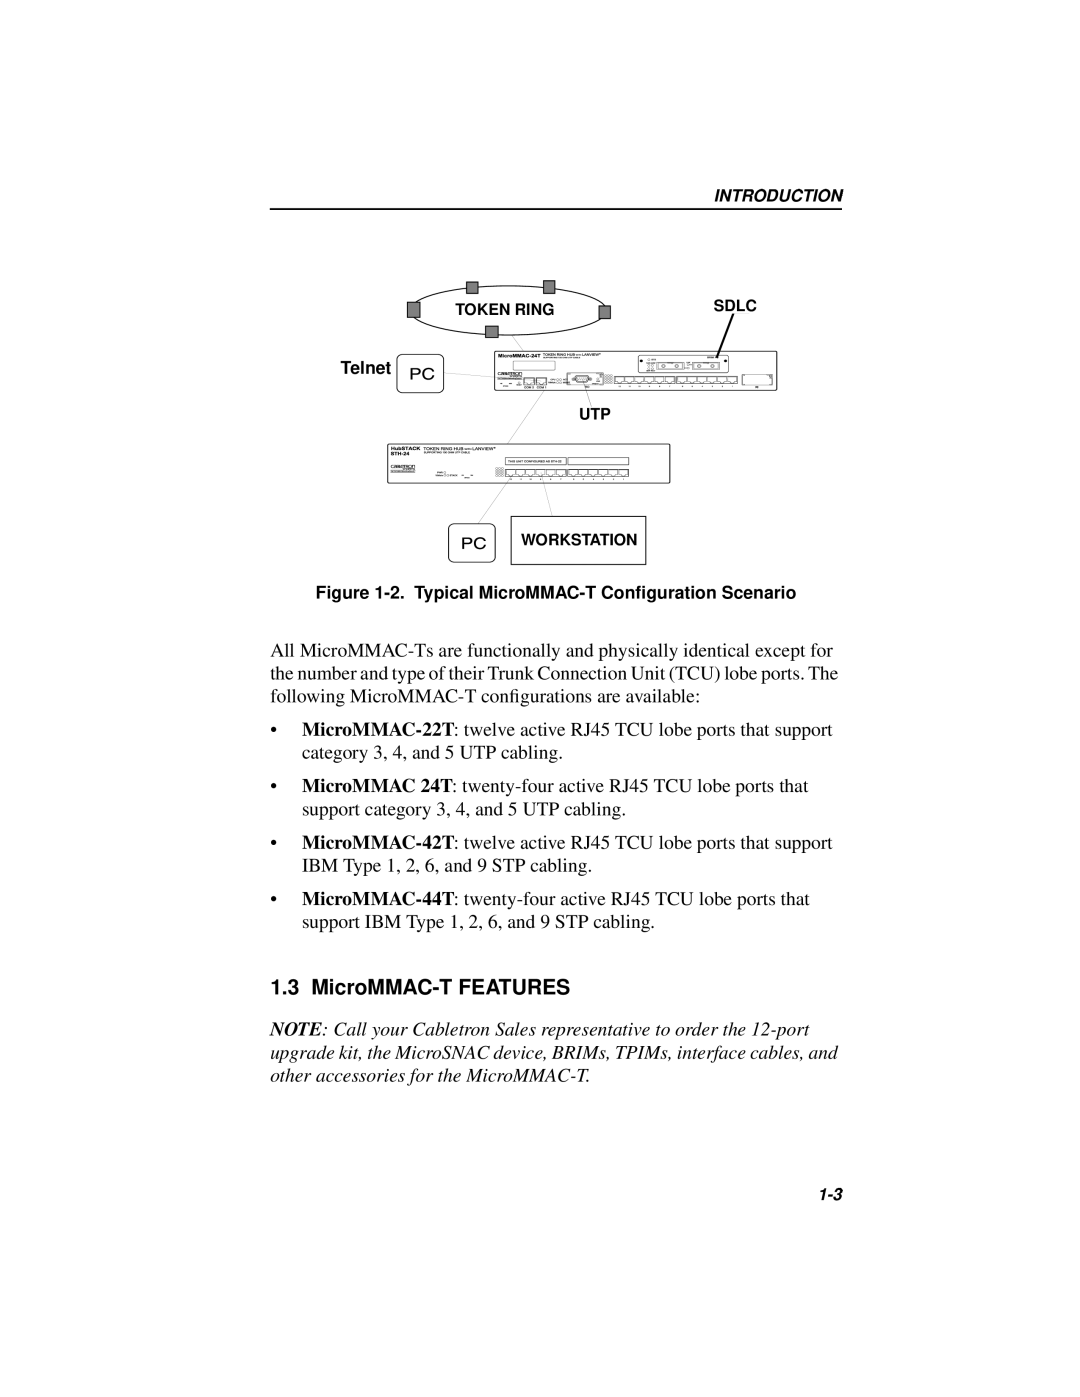 Cabletron Systems 42T, MICROMMAC-22T manual MicroMMAC-T FEATURES, Telnet, 2. Typical MicroMMAC-T Conﬁguration Scenario 